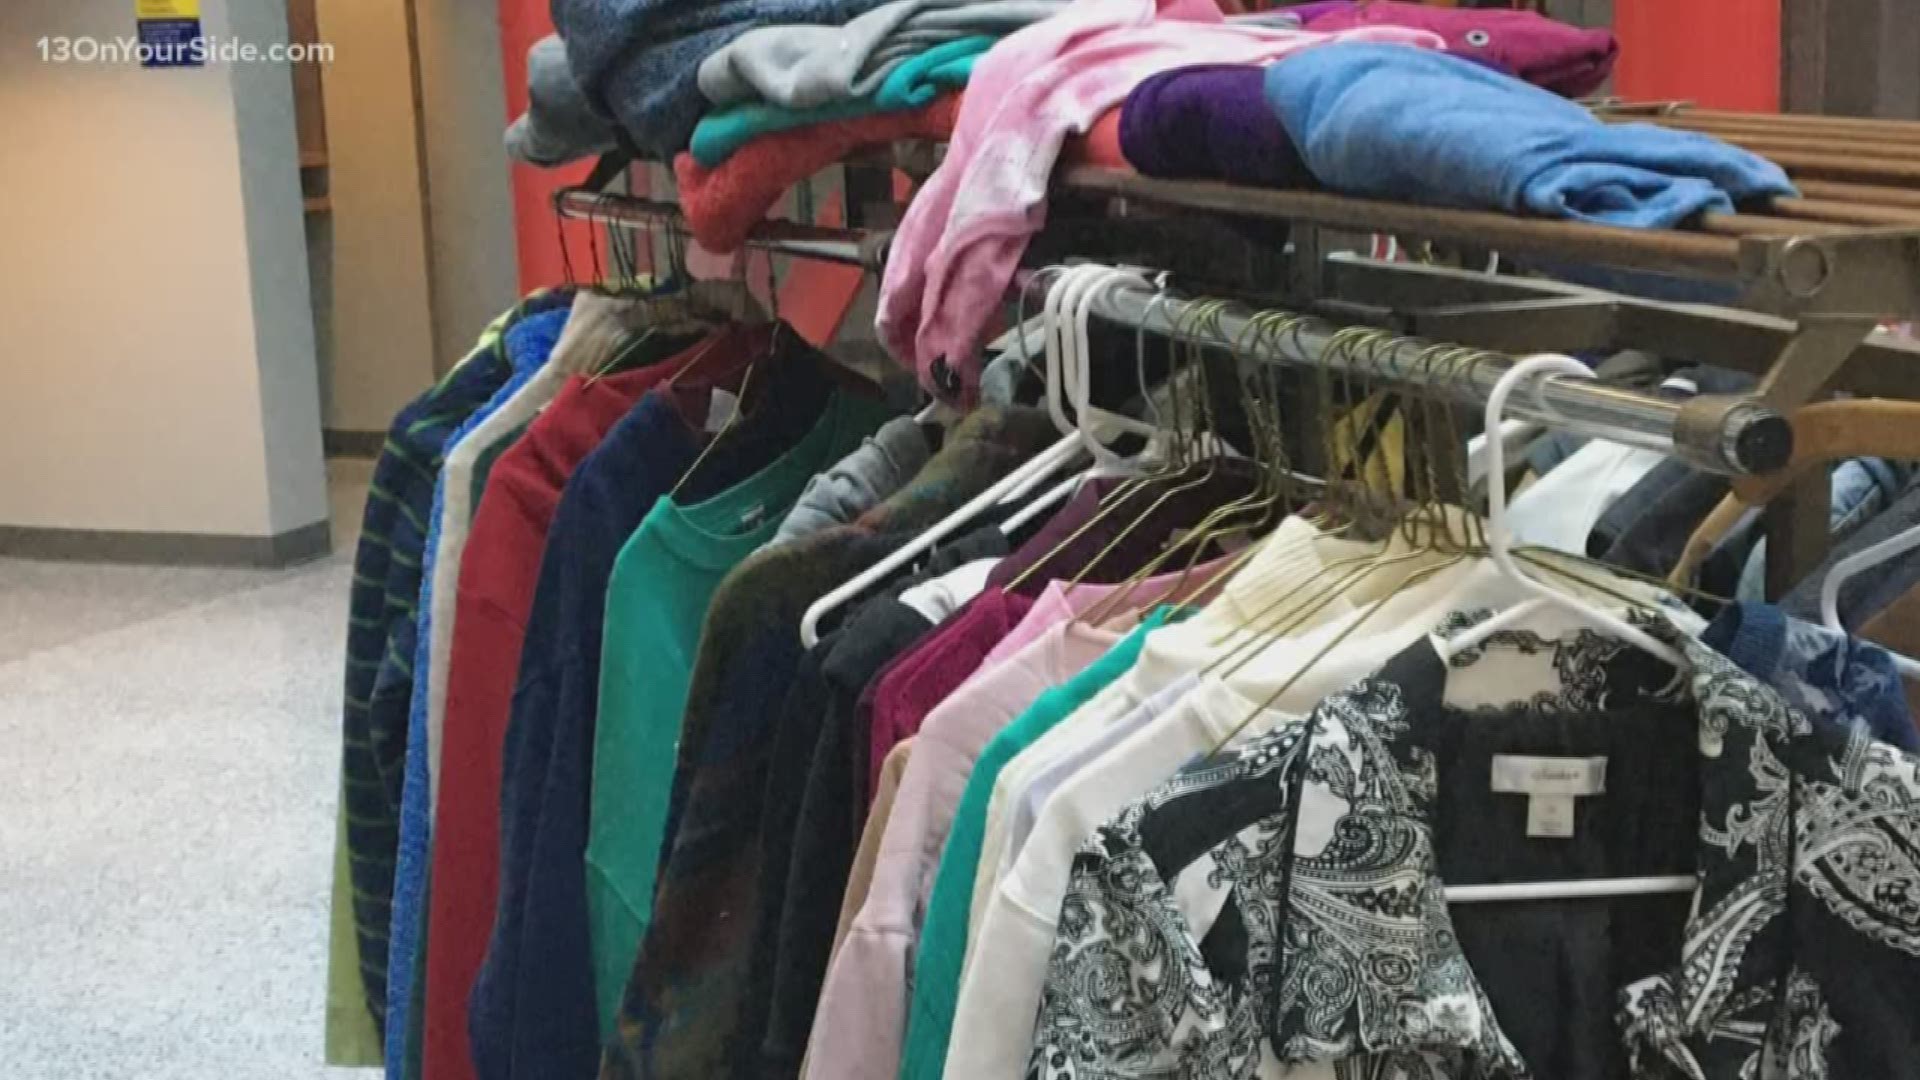 People were asked to drop off gently-used winter clothes.